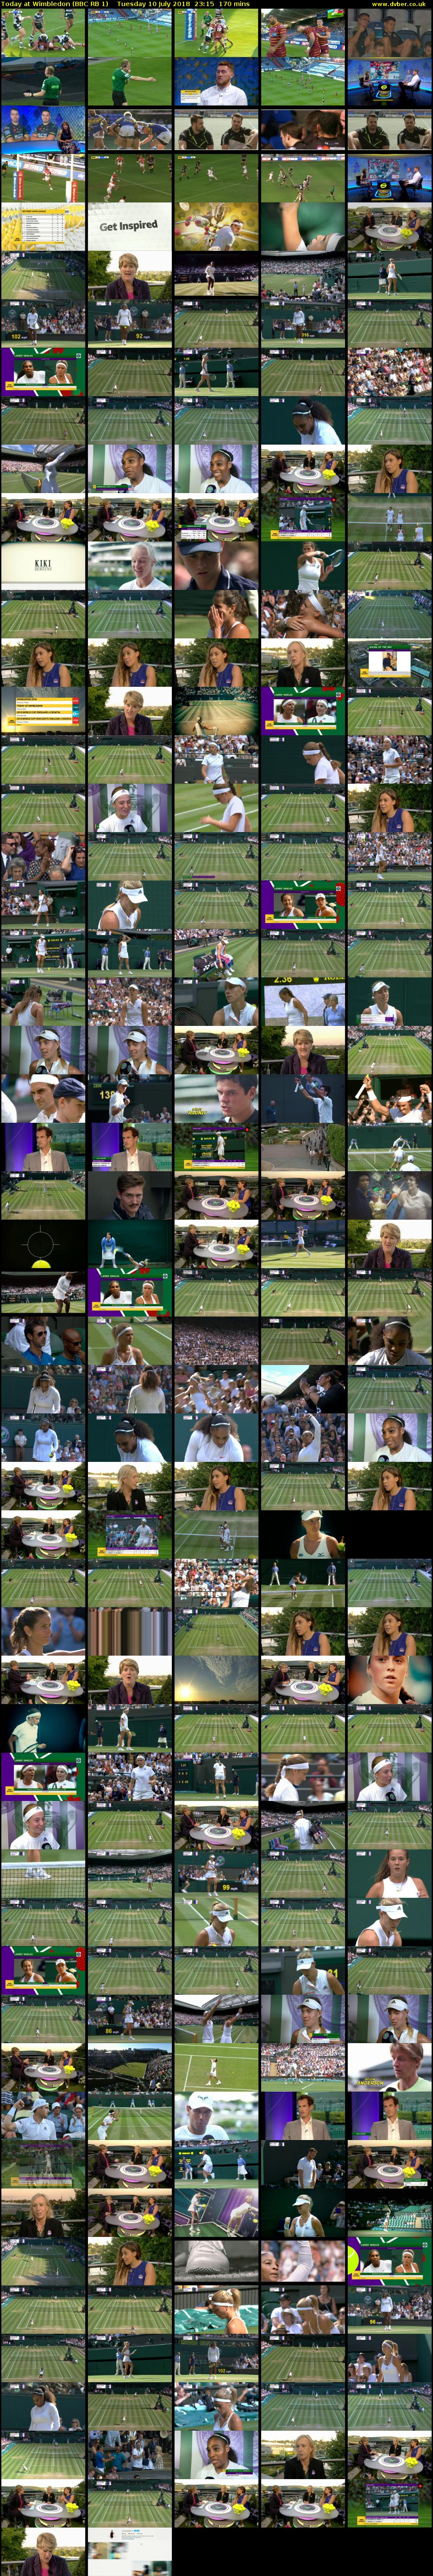 Today at Wimbledon (BBC RB 1) Tuesday 10 July 2018 23:15 - 02:05